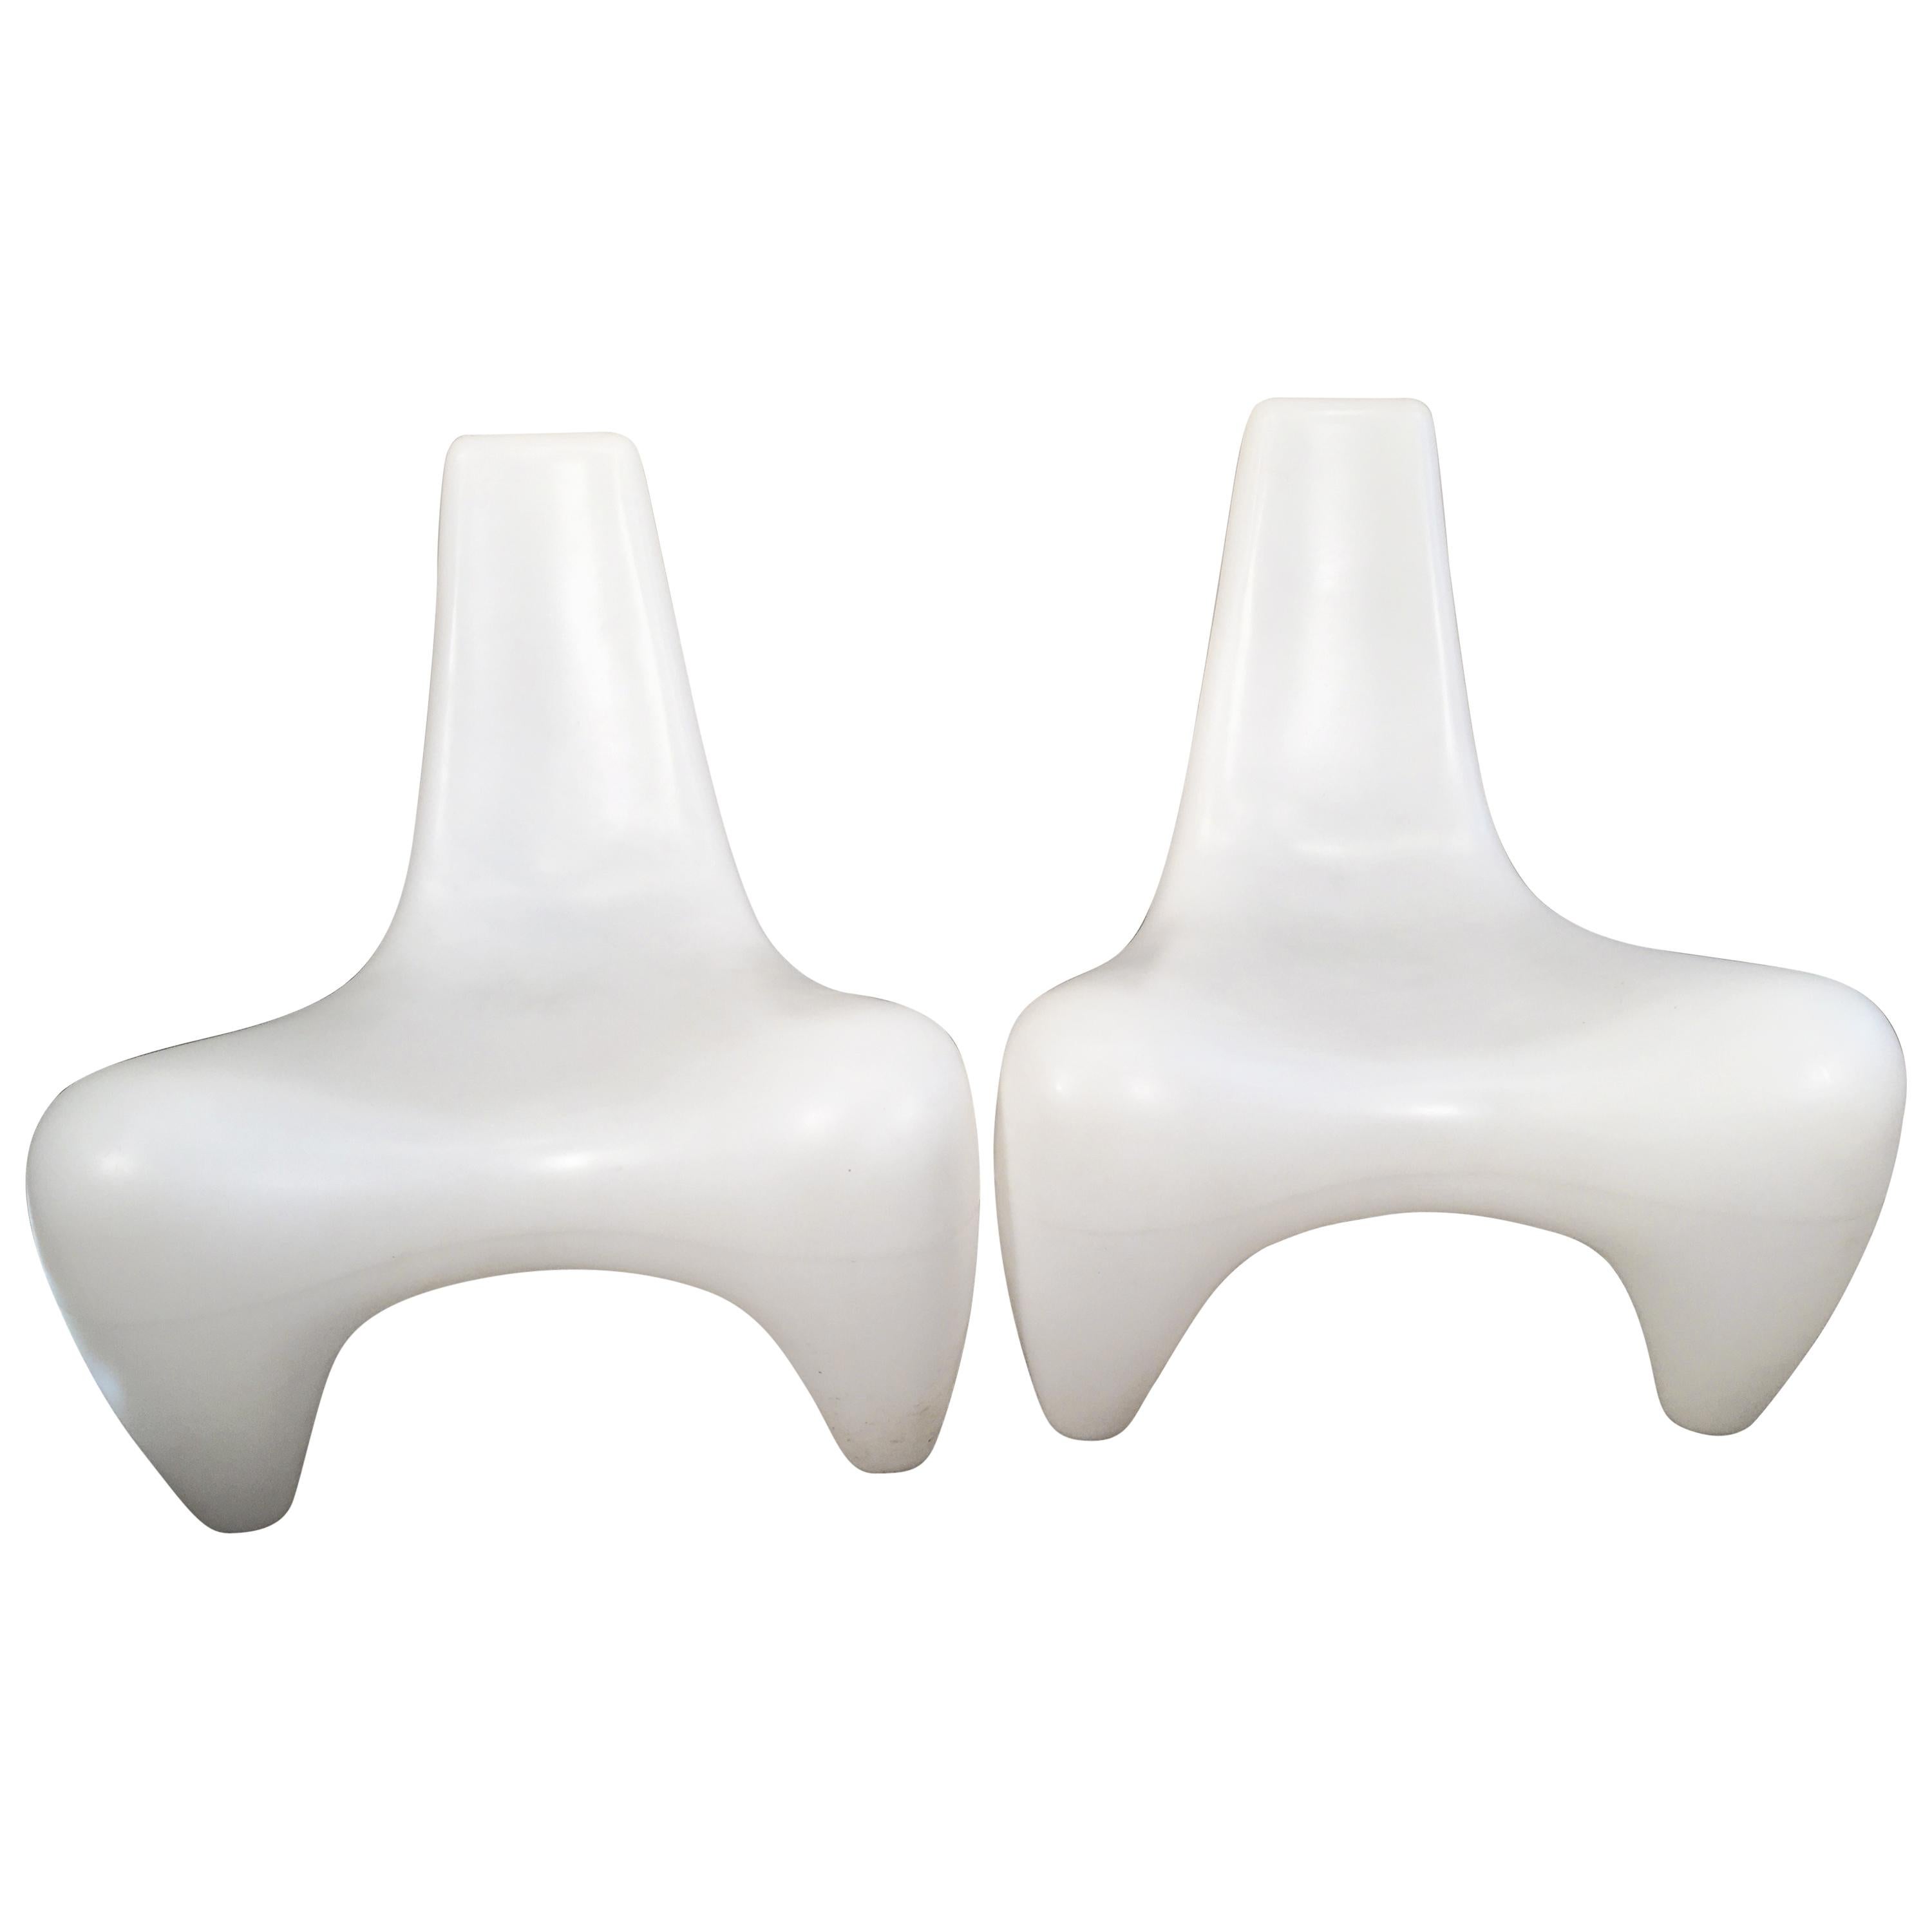 Pair of White "Spidlight" Chairs by Douglas Mont for Jetnet with Interior Lights For Sale